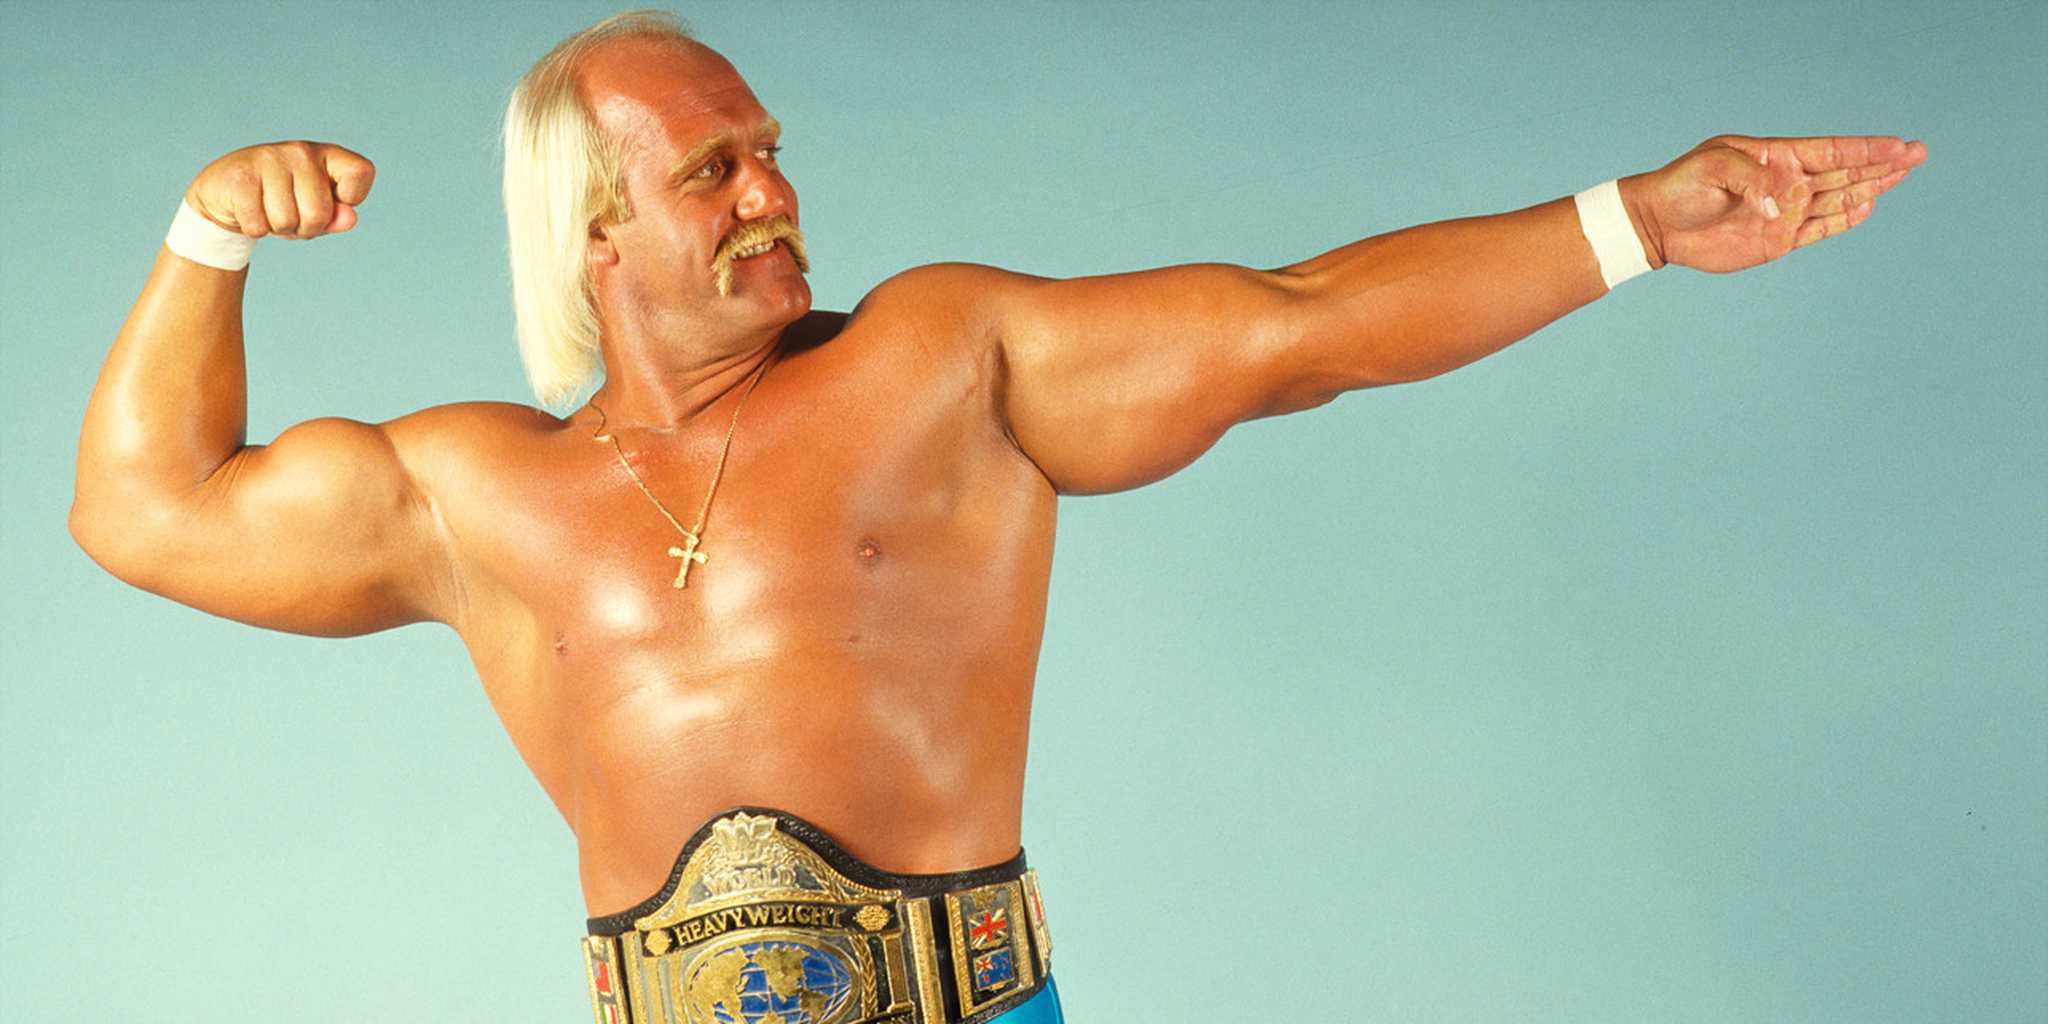 What the Hulk Hogan sex tape trial means for the future of privacy